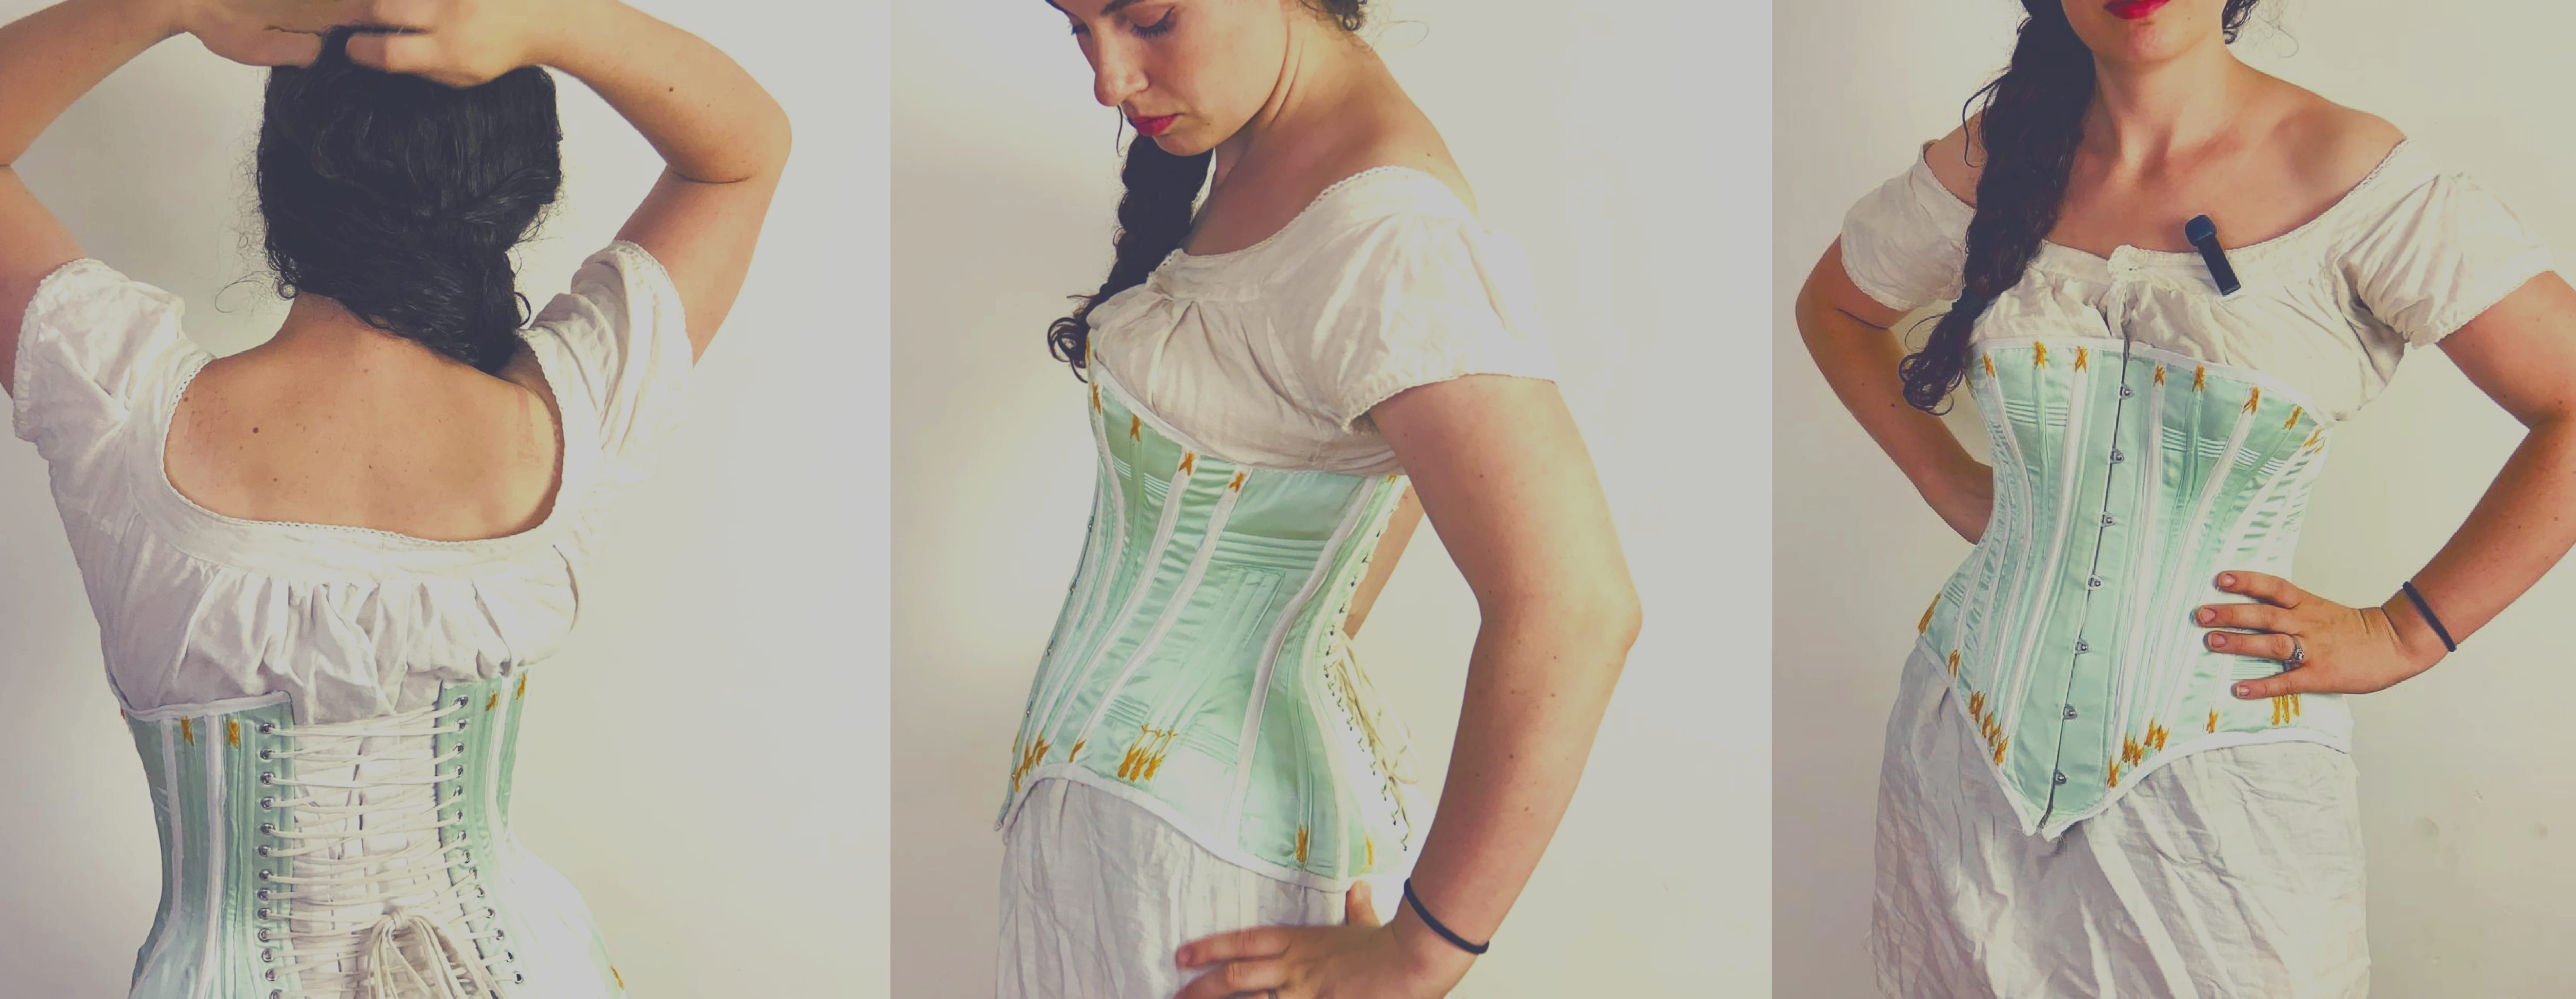 Corset Fitting 101: How to Properly Fit a Corset